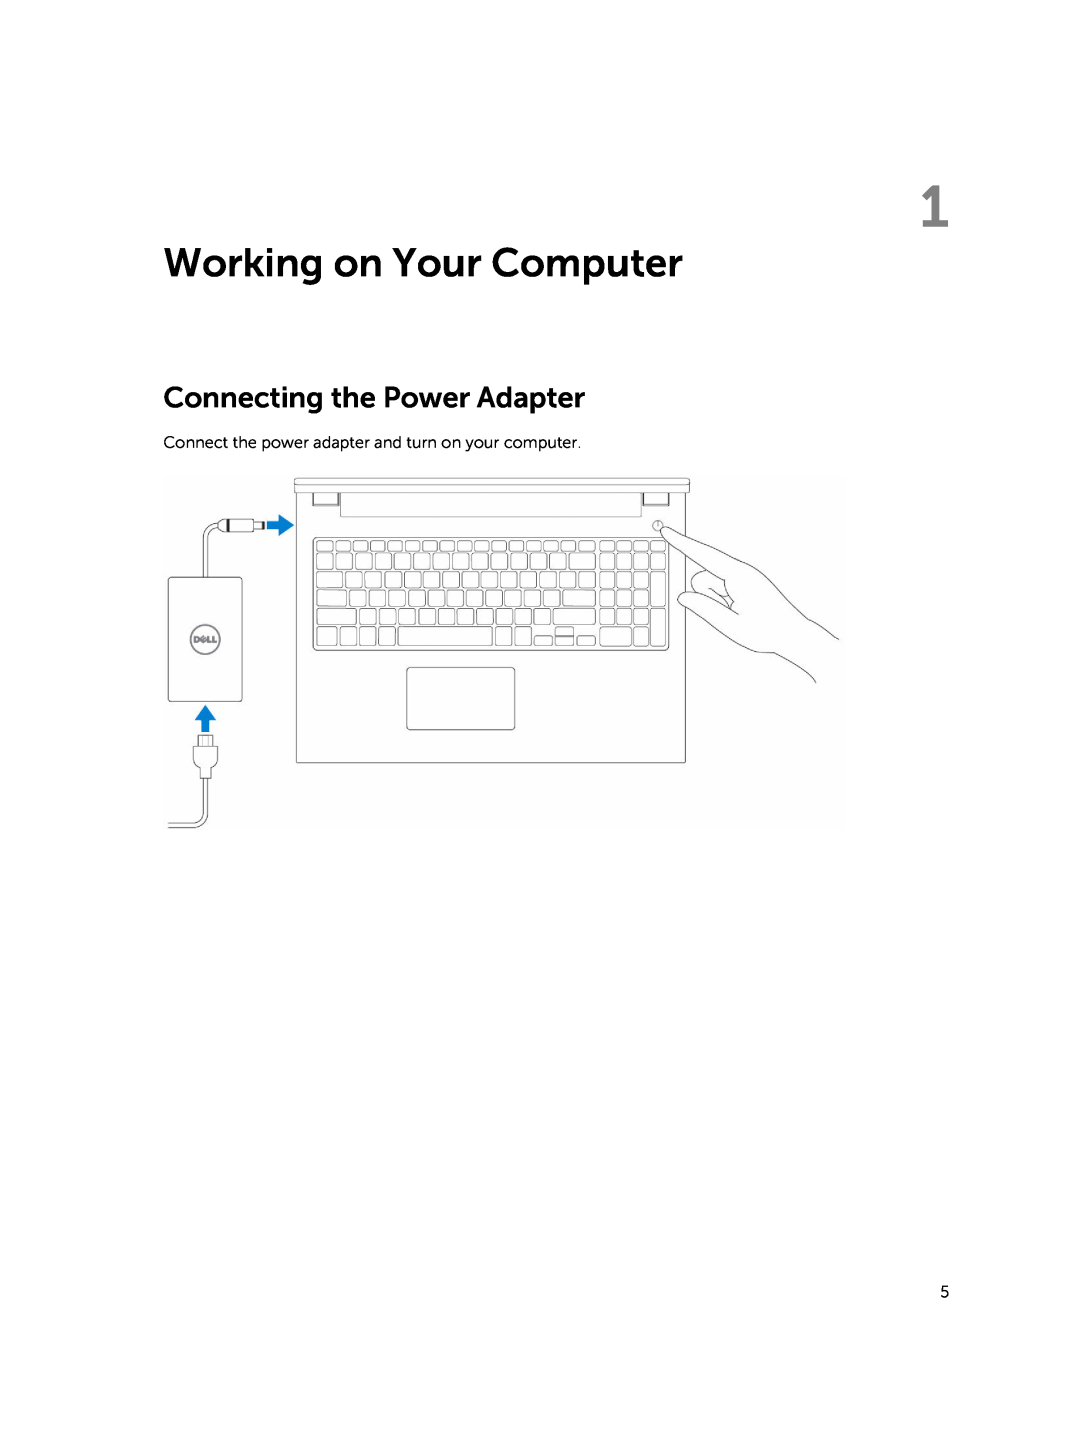 Dell P45F001 owner manual Working on Your Computer, Connecting the Power Adapter 